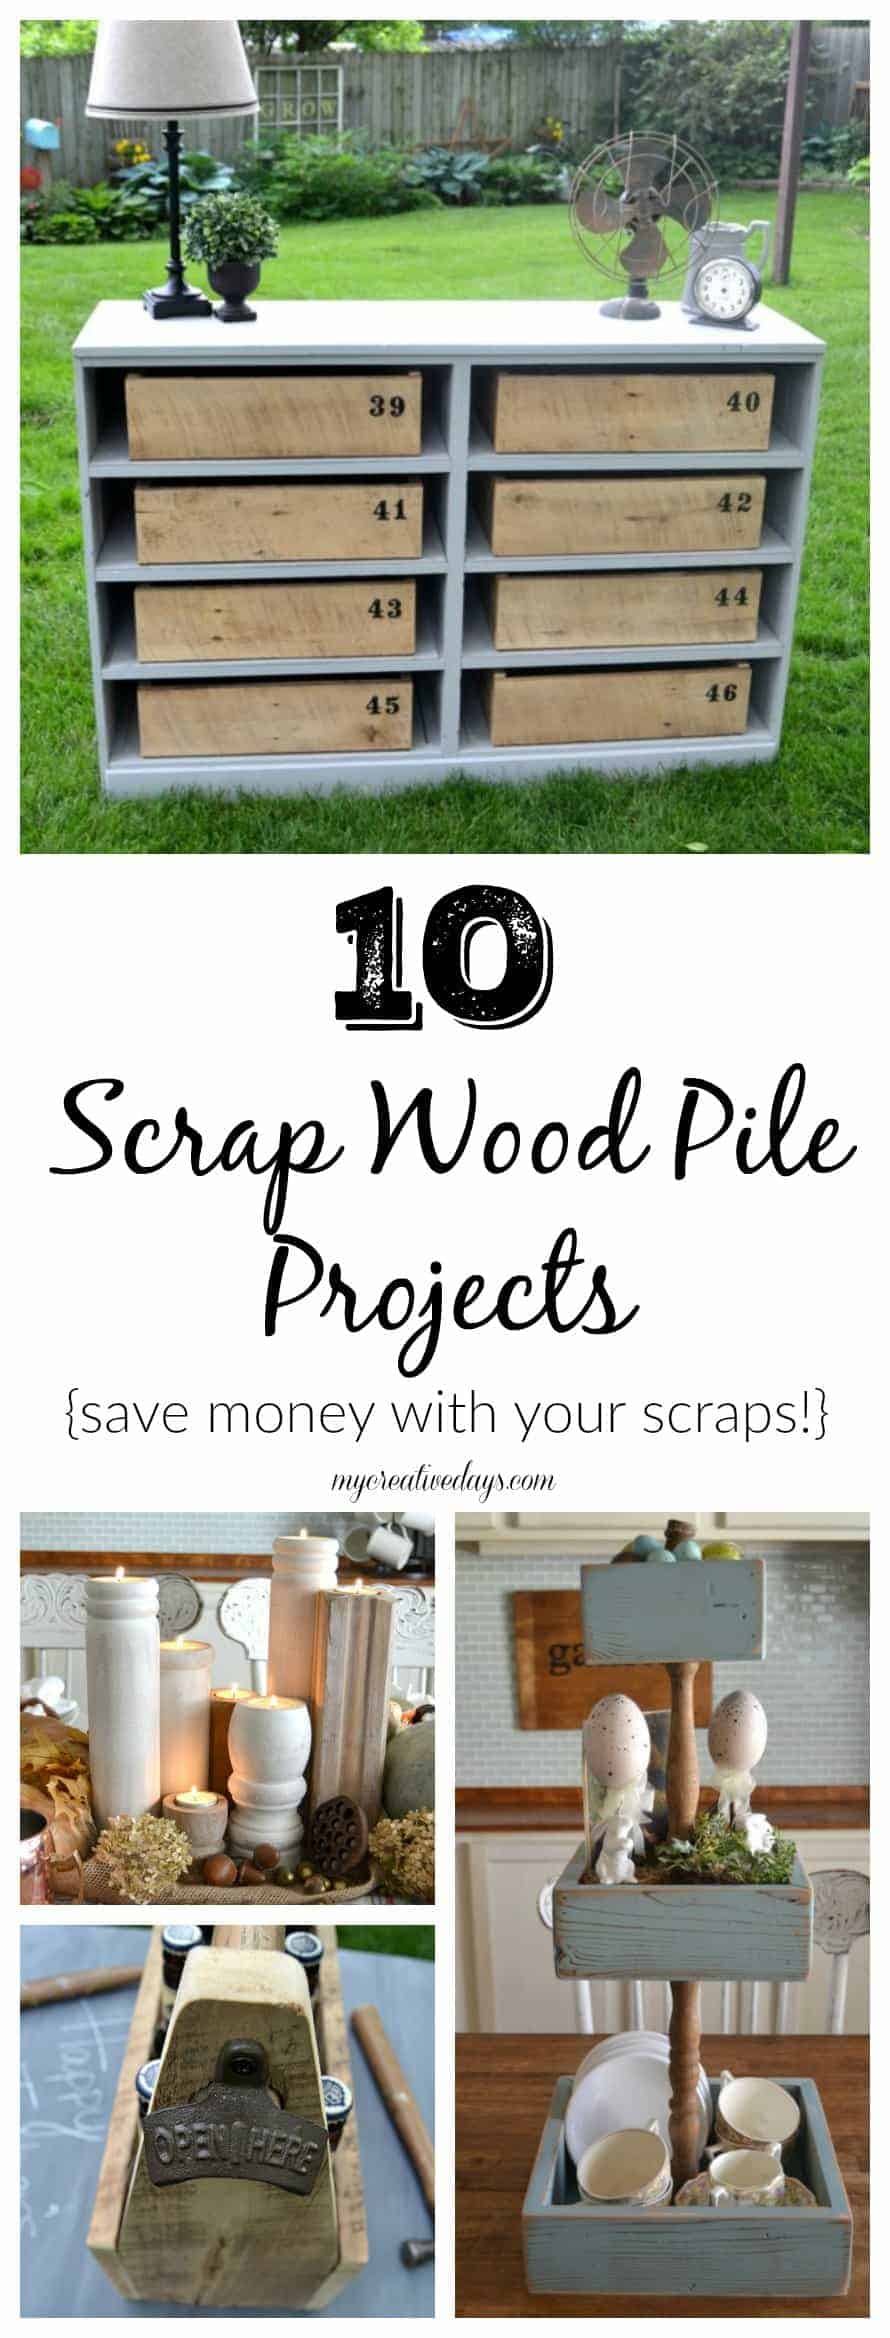 10 Scrap Wood Pile Projects That Will Save You Money - My ...